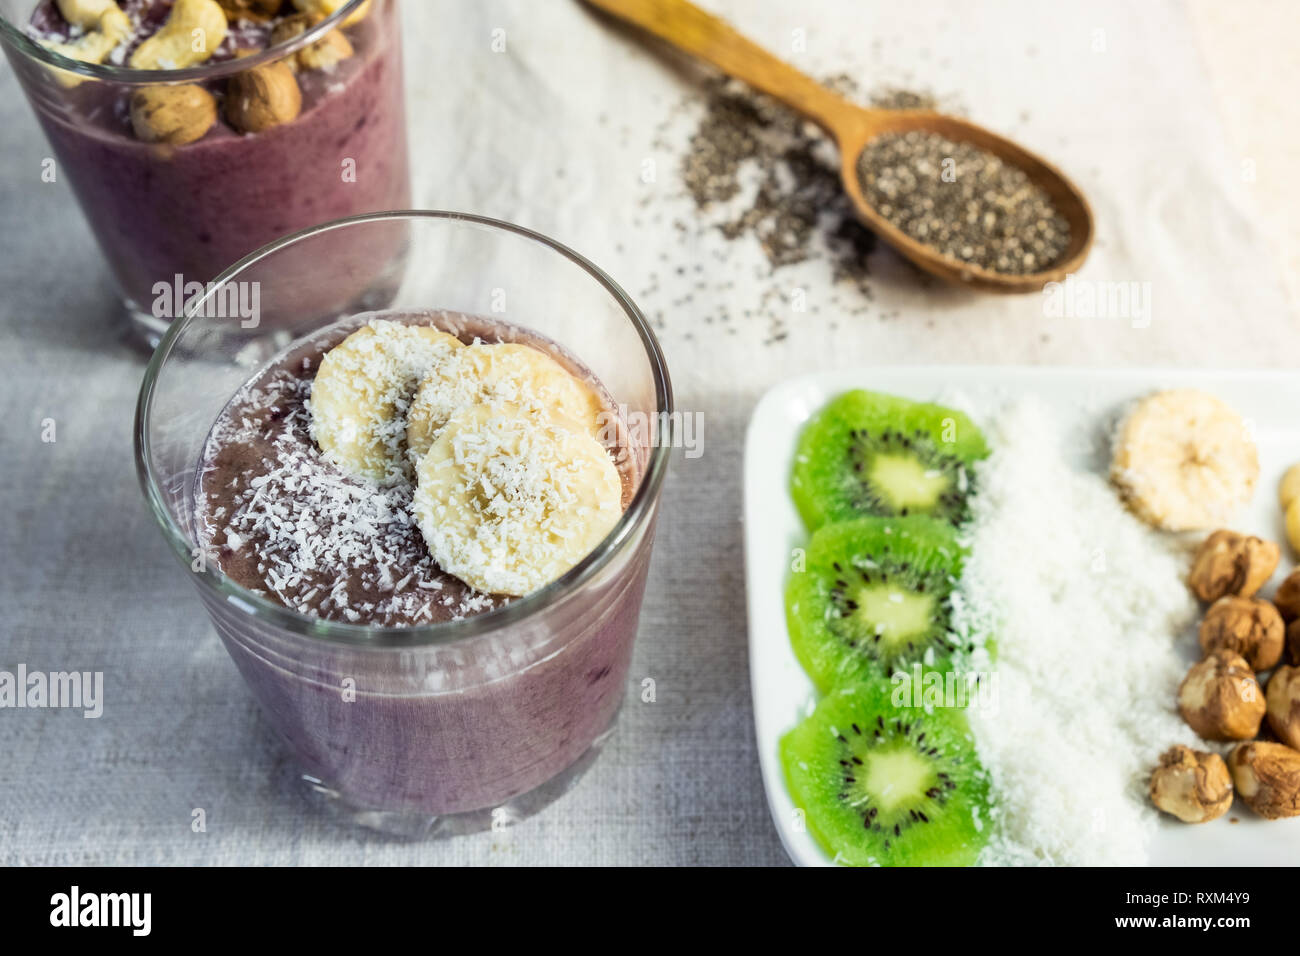 Smoothie bowl breakfast and topping ingredients. Healthy organic raw food meals in natural rustic background Stock Photo